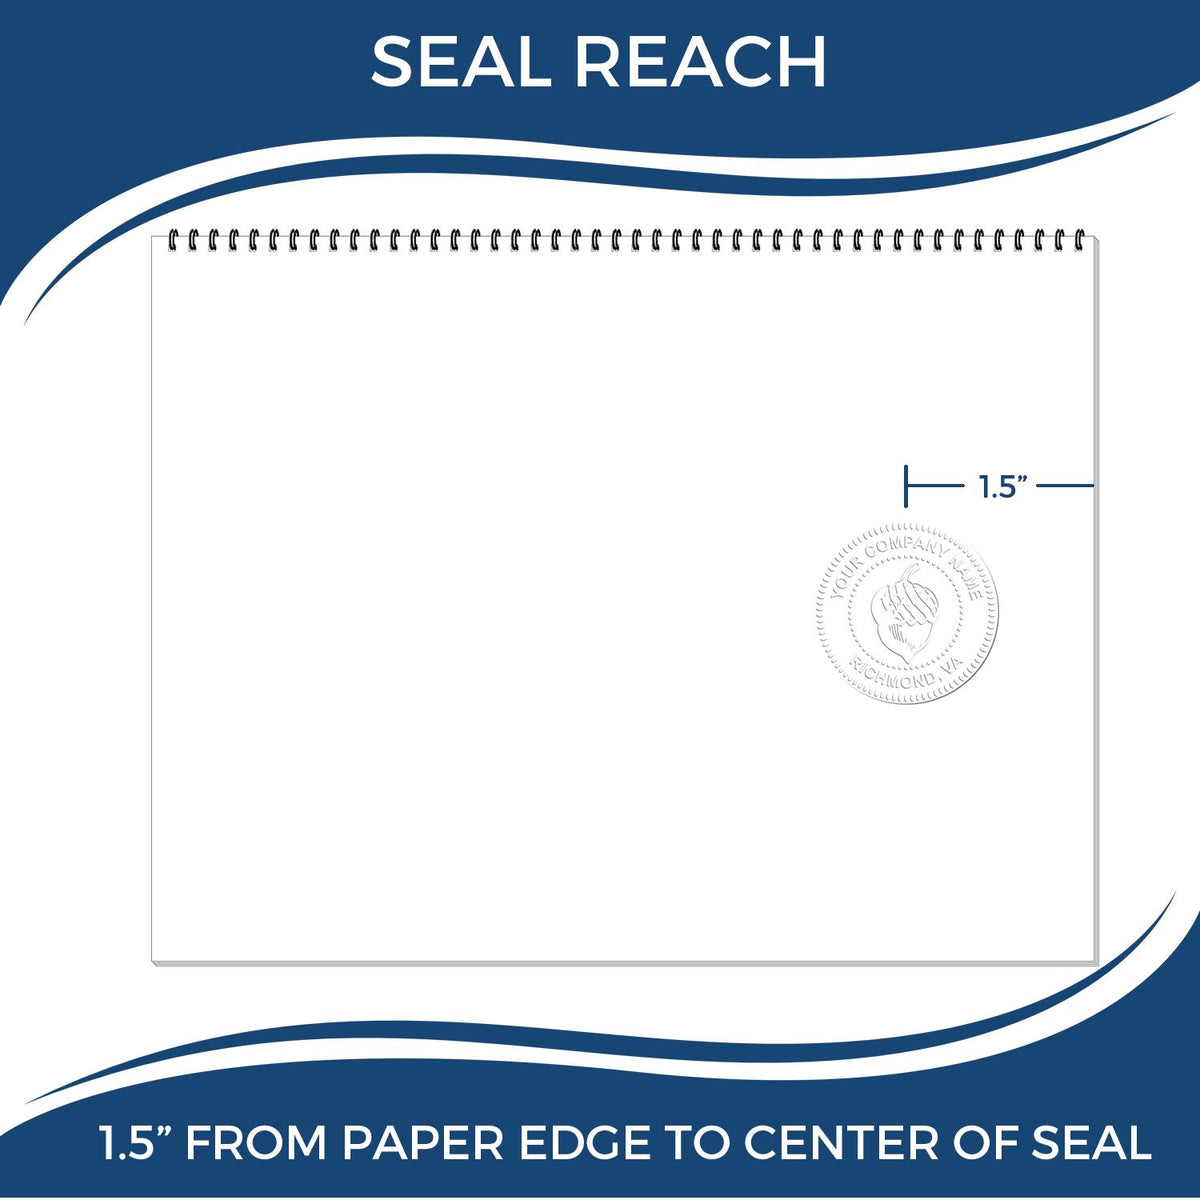 An infographic showing the seal reach which is represented by a ruler and a miniature seal image of the Gift New York Landscape Architect Seal